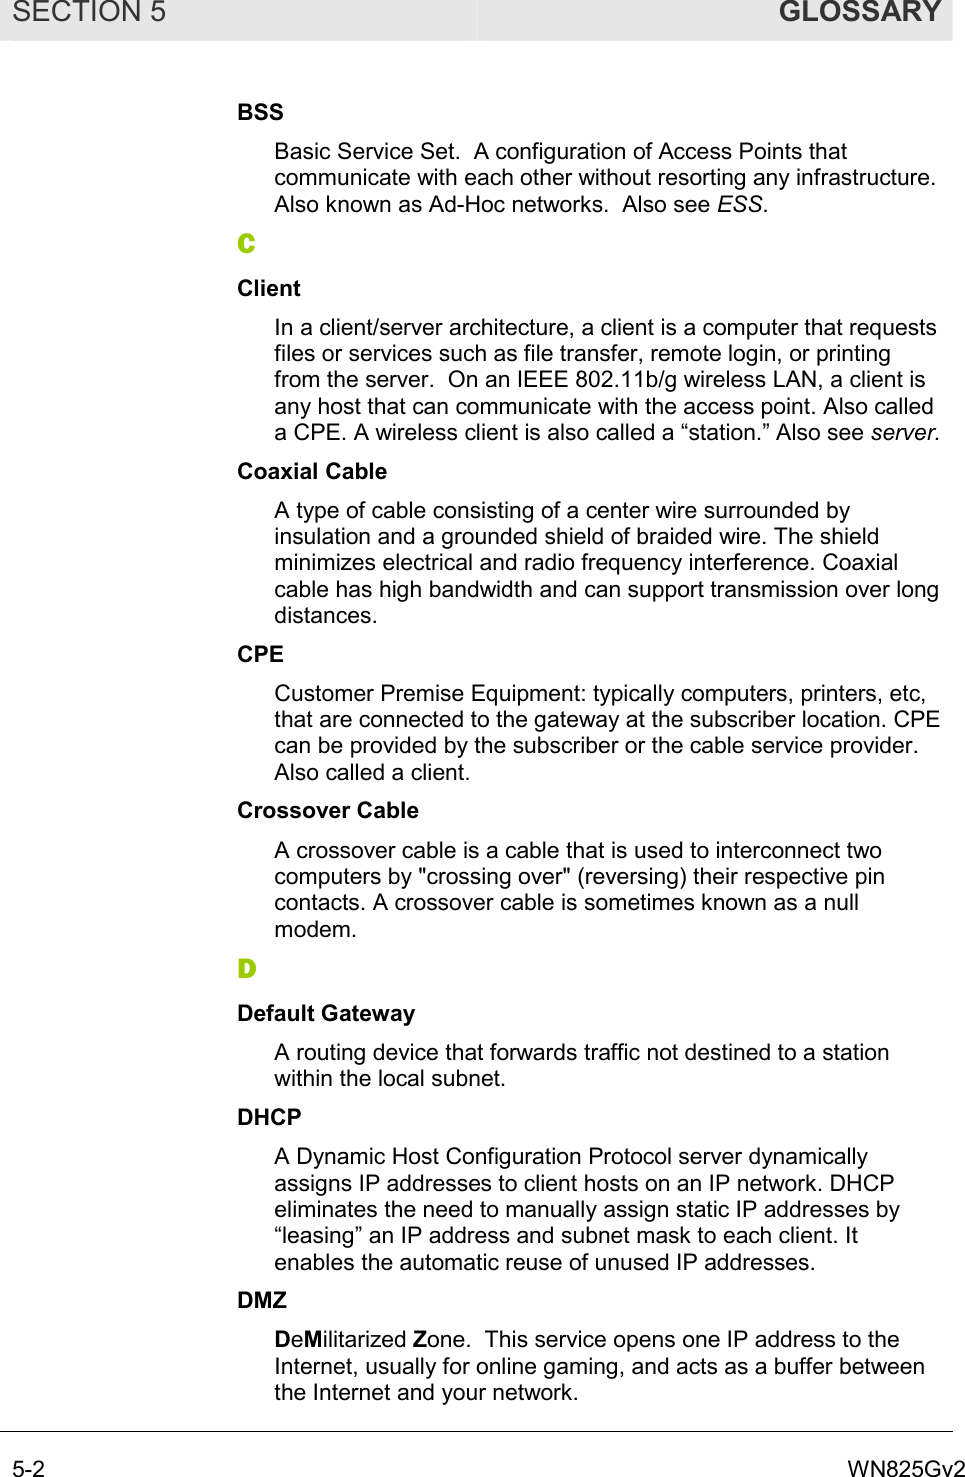 SECTION 5  GLOSSARY 5-2  WN825Gv2 BSS Basic Service Set.  A configuration of Access Points that communicate with each other without resorting any infrastructure. Also known as Ad-Hoc networks.  Also see ESS. C Client In a client/server architecture, a client is a computer that requests files or services such as file transfer, remote login, or printing from the server.  On an IEEE 802.11b/g wireless LAN, a client is any host that can communicate with the access point. Also called a CPE. A wireless client is also called a “station.” Also see server. Coaxial Cable A type of cable consisting of a center wire surrounded by insulation and a grounded shield of braided wire. The shield minimizes electrical and radio frequency interference. Coaxial cable has high bandwidth and can support transmission over long distances. CPE Customer Premise Equipment: typically computers, printers, etc, that are connected to the gateway at the subscriber location. CPE can be provided by the subscriber or the cable service provider. Also called a client. Crossover Cable A crossover cable is a cable that is used to interconnect two computers by &quot;crossing over&quot; (reversing) their respective pin contacts. A crossover cable is sometimes known as a null modem.  D Default Gateway A routing device that forwards traffic not destined to a station within the local subnet. DHCP A Dynamic Host Configuration Protocol server dynamically assigns IP addresses to client hosts on an IP network. DHCP eliminates the need to manually assign static IP addresses by “leasing” an IP address and subnet mask to each client. It enables the automatic reuse of unused IP addresses. DMZ DeMilitarized Zone.  This service opens one IP address to the Internet, usually for online gaming, and acts as a buffer between the Internet and your network. 